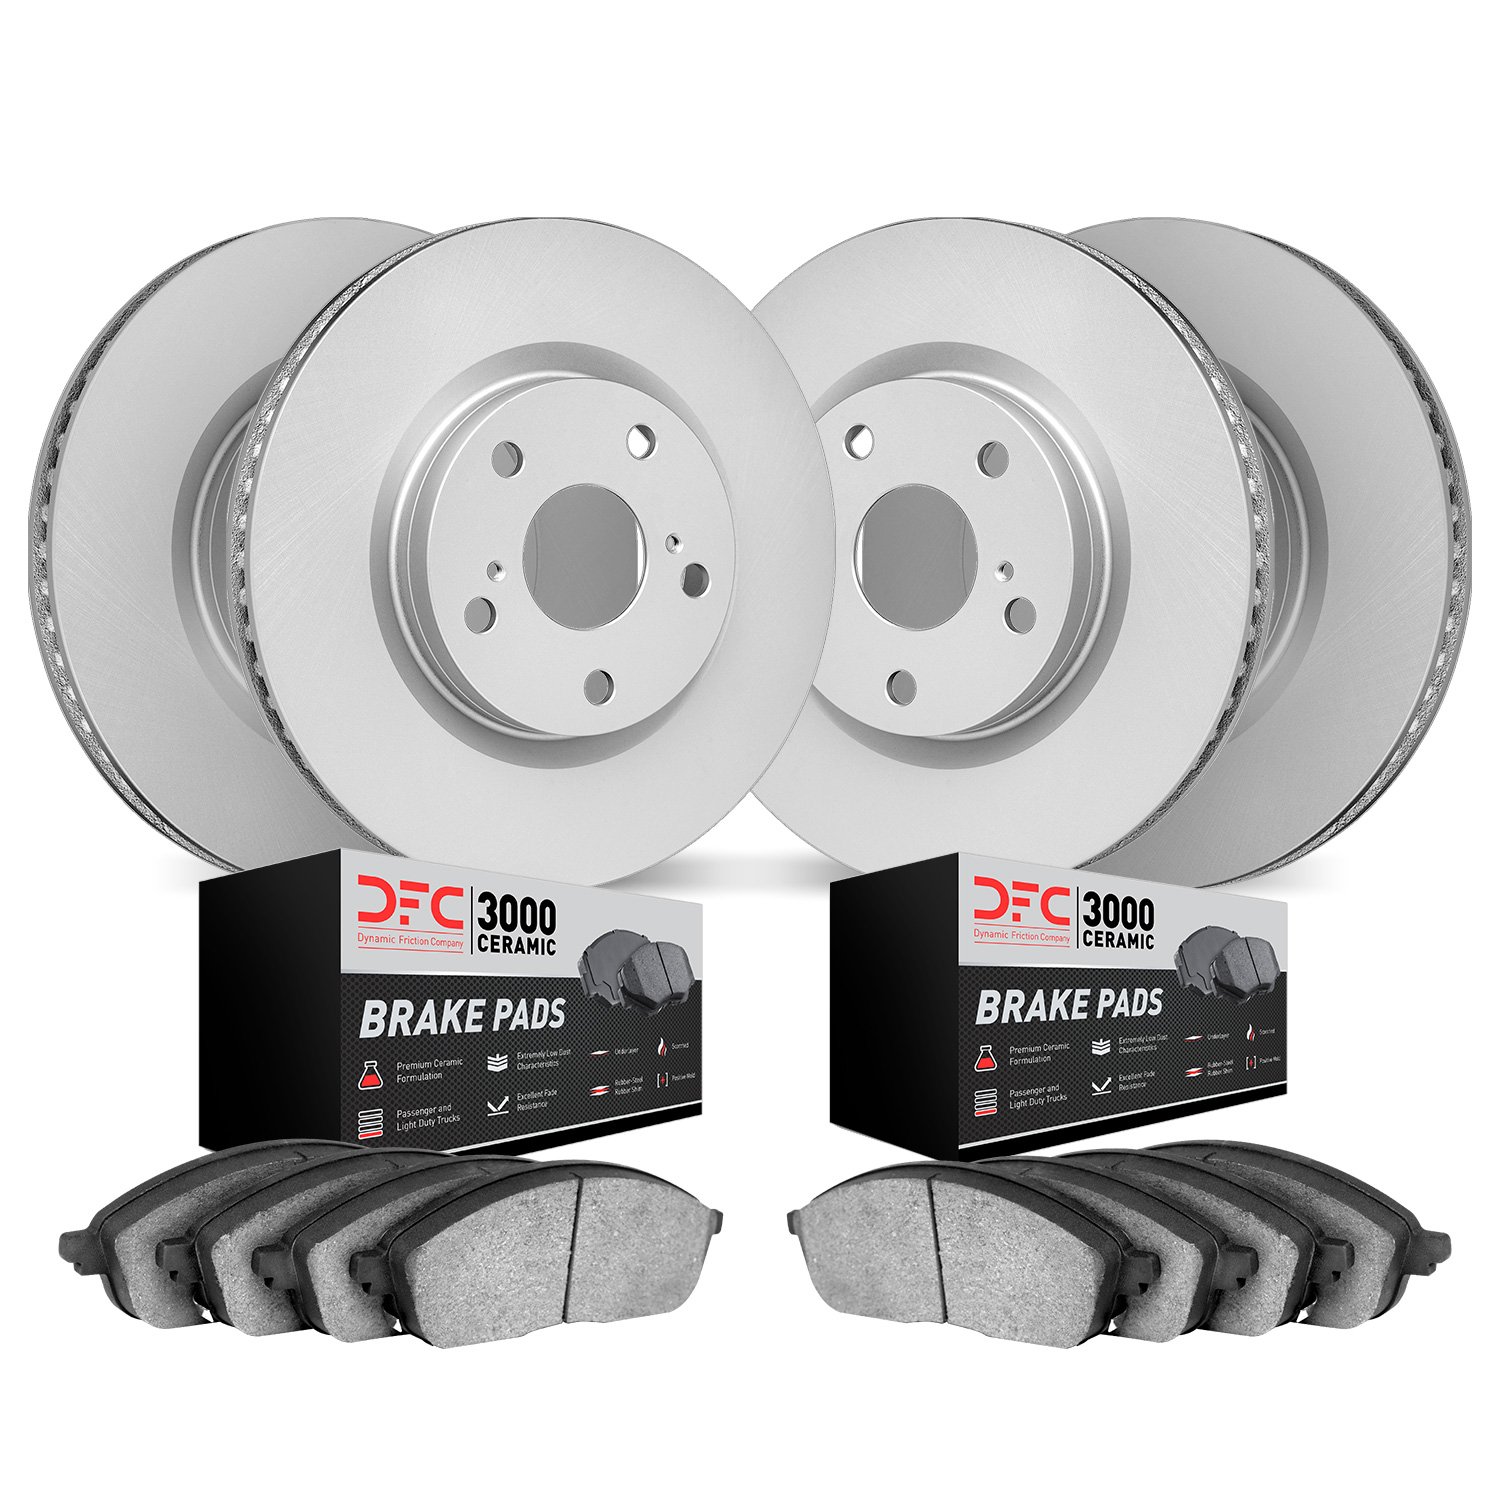 4304-31028 Geospec Brake Rotors with 3000-Series Ceramic Brake Pads Kit, 2002-2005 BMW, Position: Front and Rear